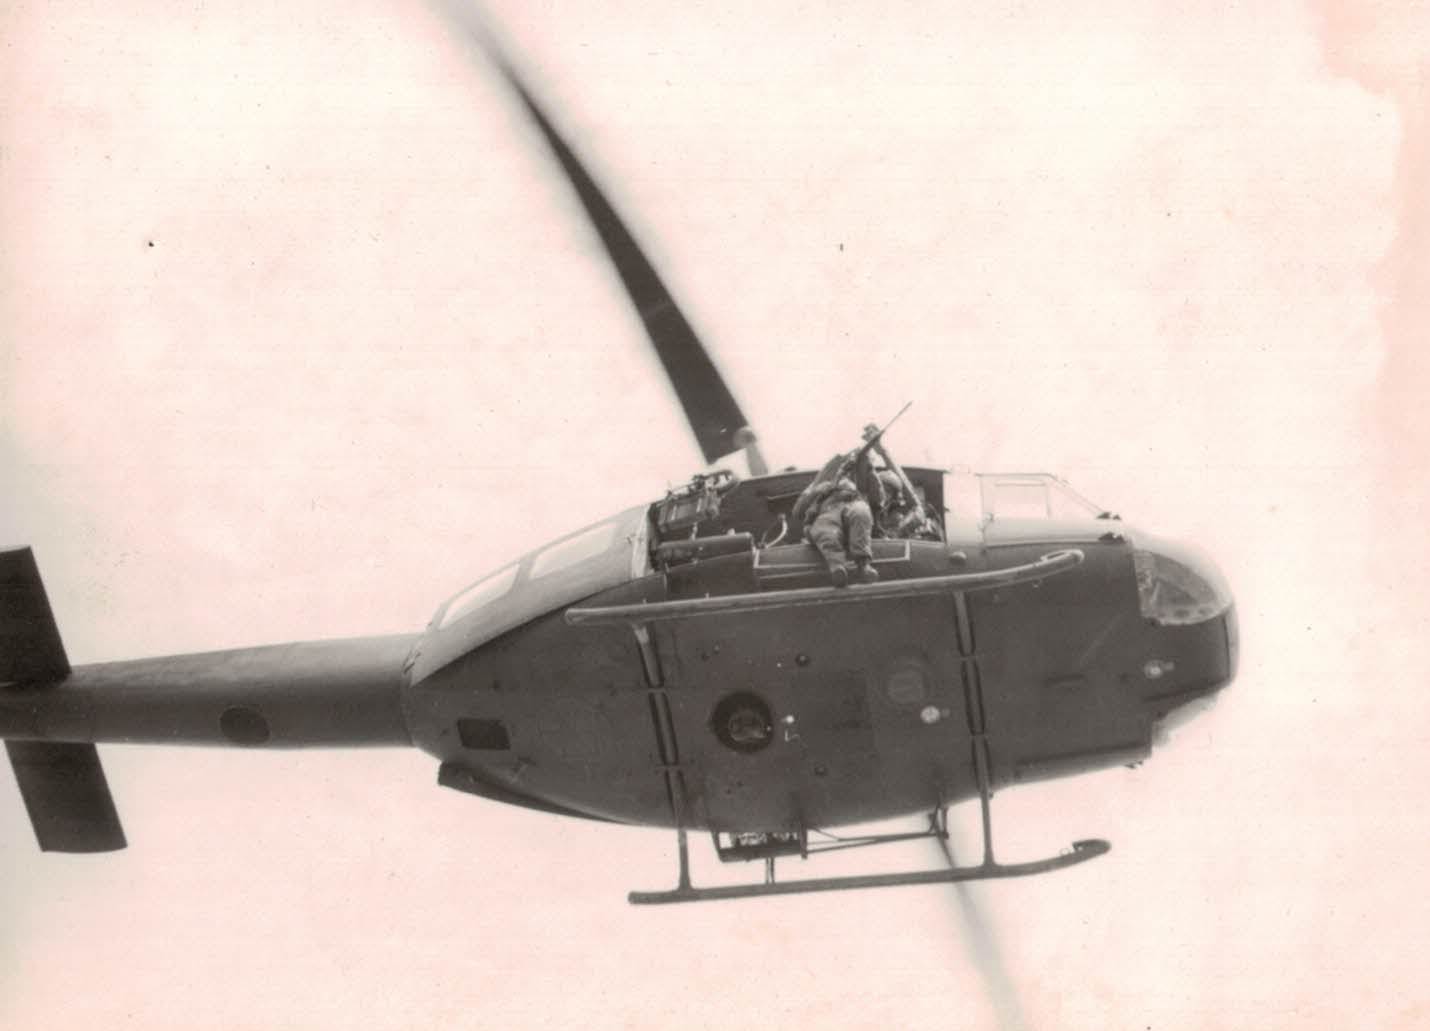 An Iroquois helicopter participating in practice of medical evacuation (Dustoff).  This happened on the SQN helipad.